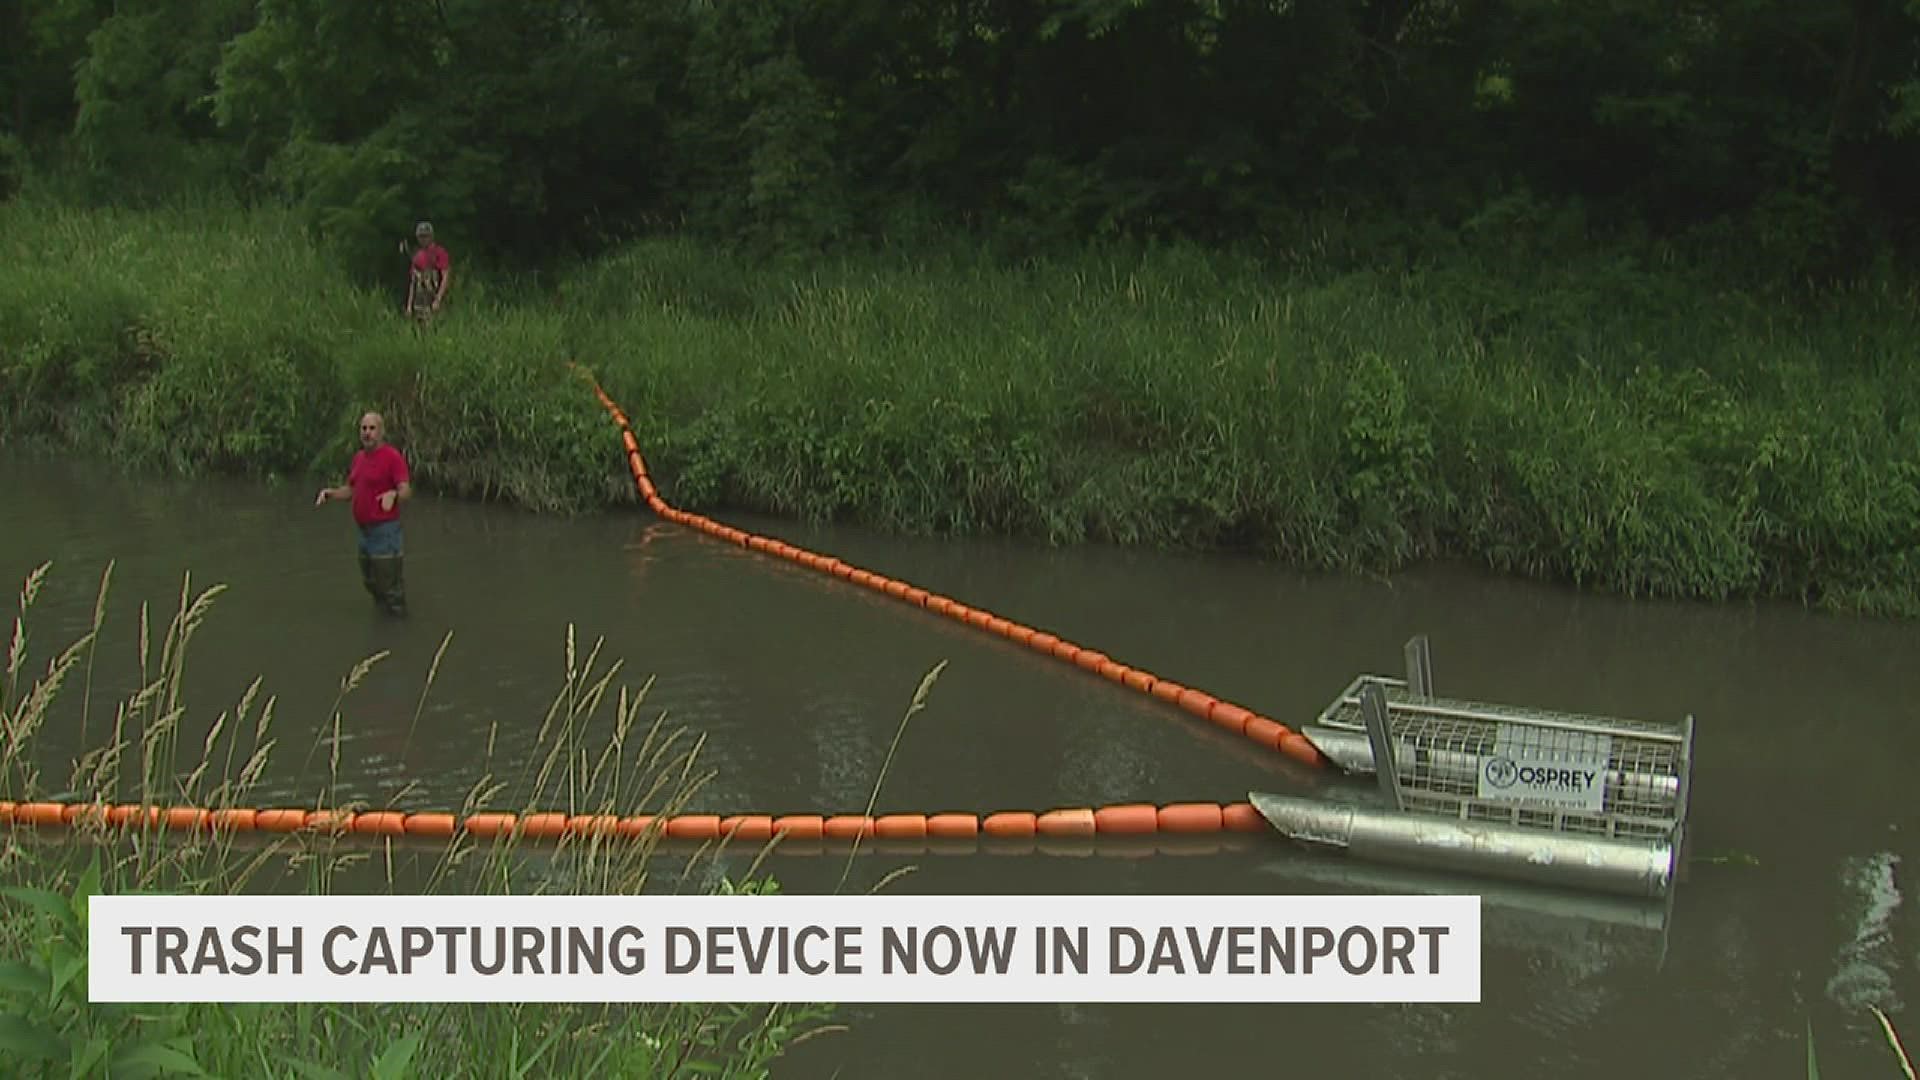 The project will work through the fall, collecting data from devices placed in Davenport's Duck, Groose and Silver creeks to learn more about litter prevention.